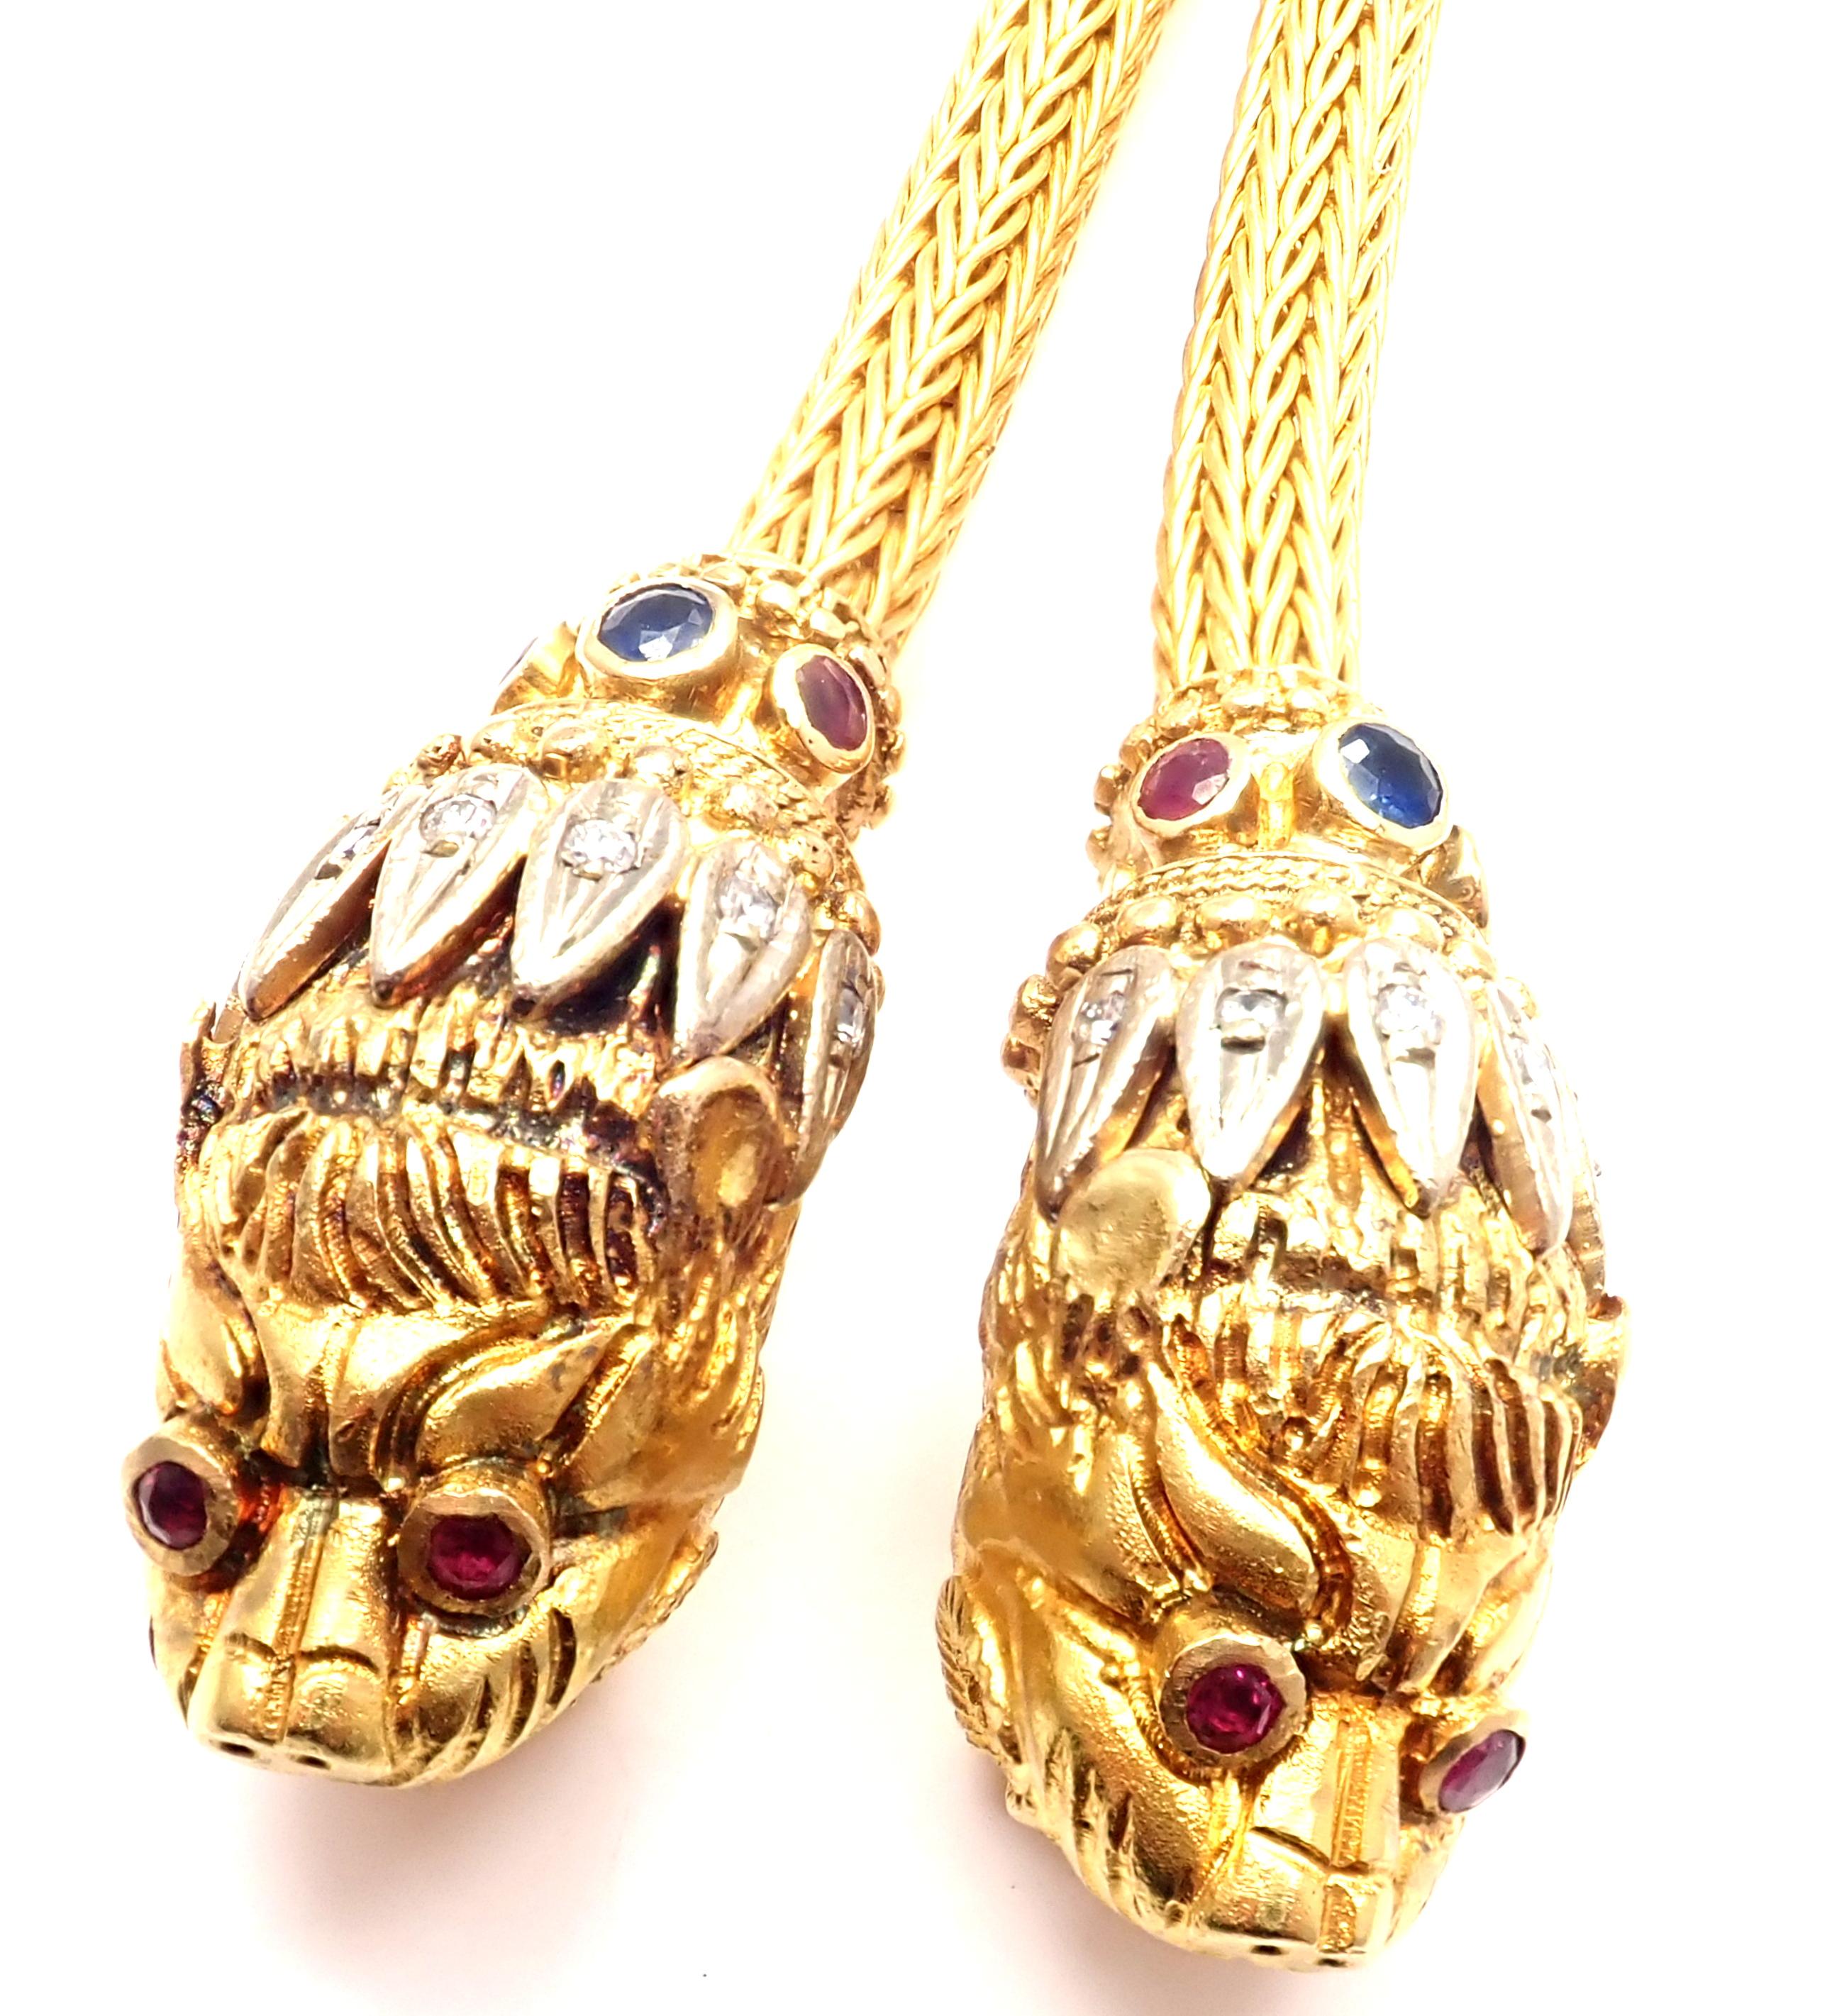 18k Yellow Gold Diamond Ruby Sapphire Chimera Long Lariat Necklace by Ilias Lalaounis Greece.
With2x Sapphires
12x Diamonds
20x Rubies
Details: 
Length 37.5